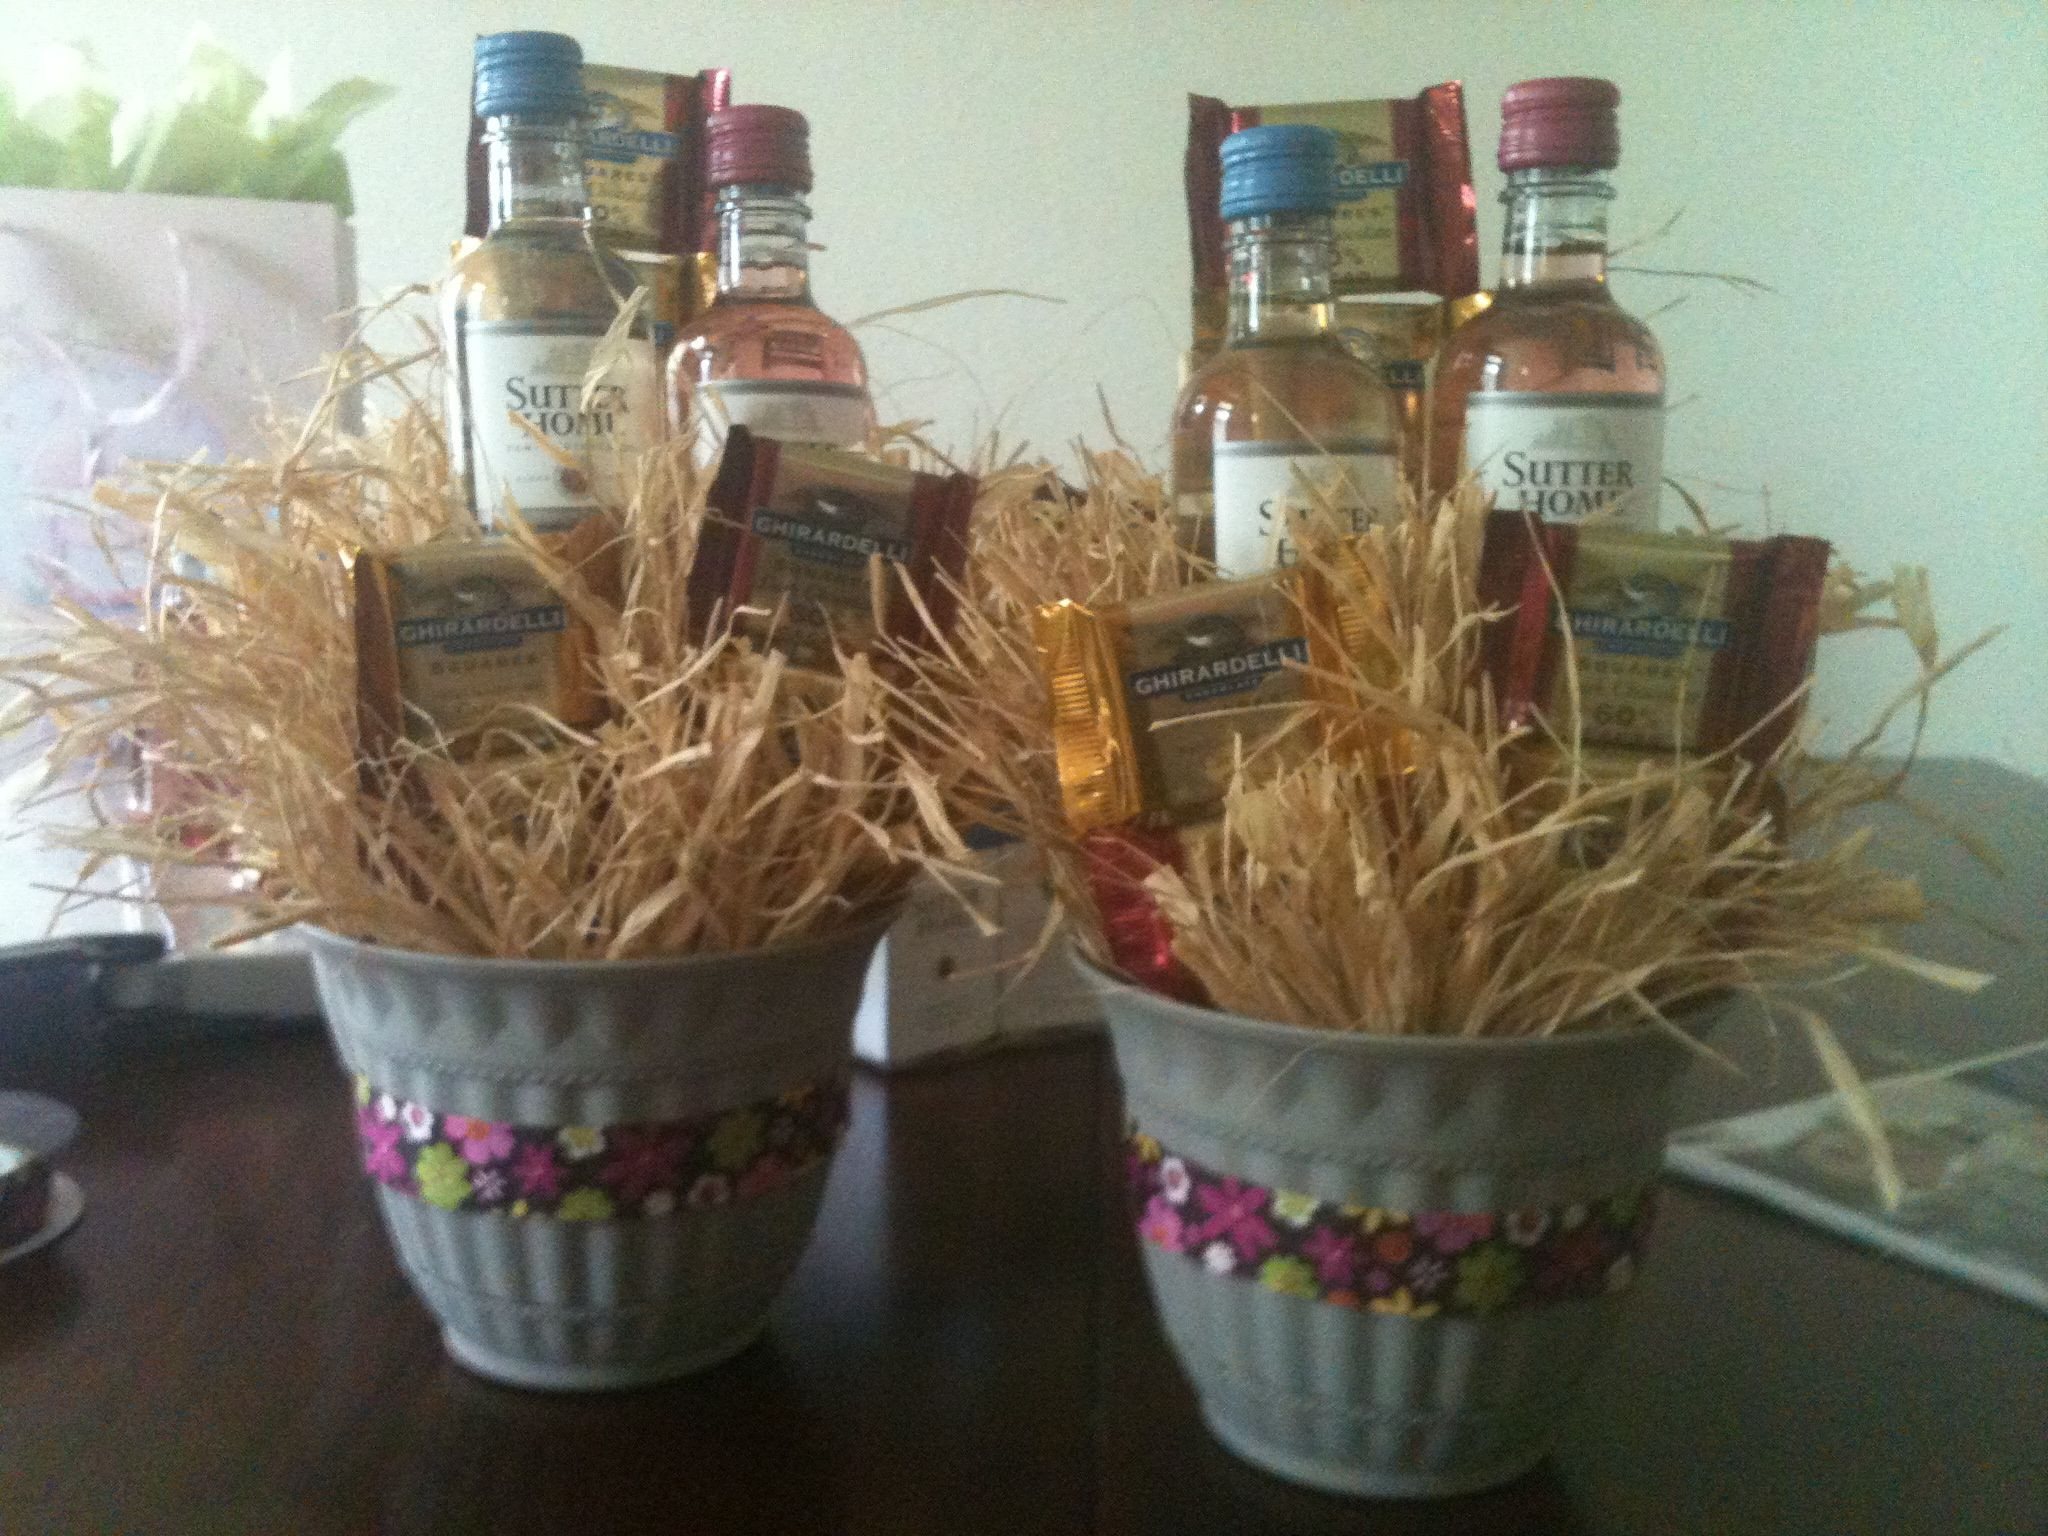 Bridal Shower Gift Basket Ideas For Guests
 Create small t baskets with wine & chocolate for your